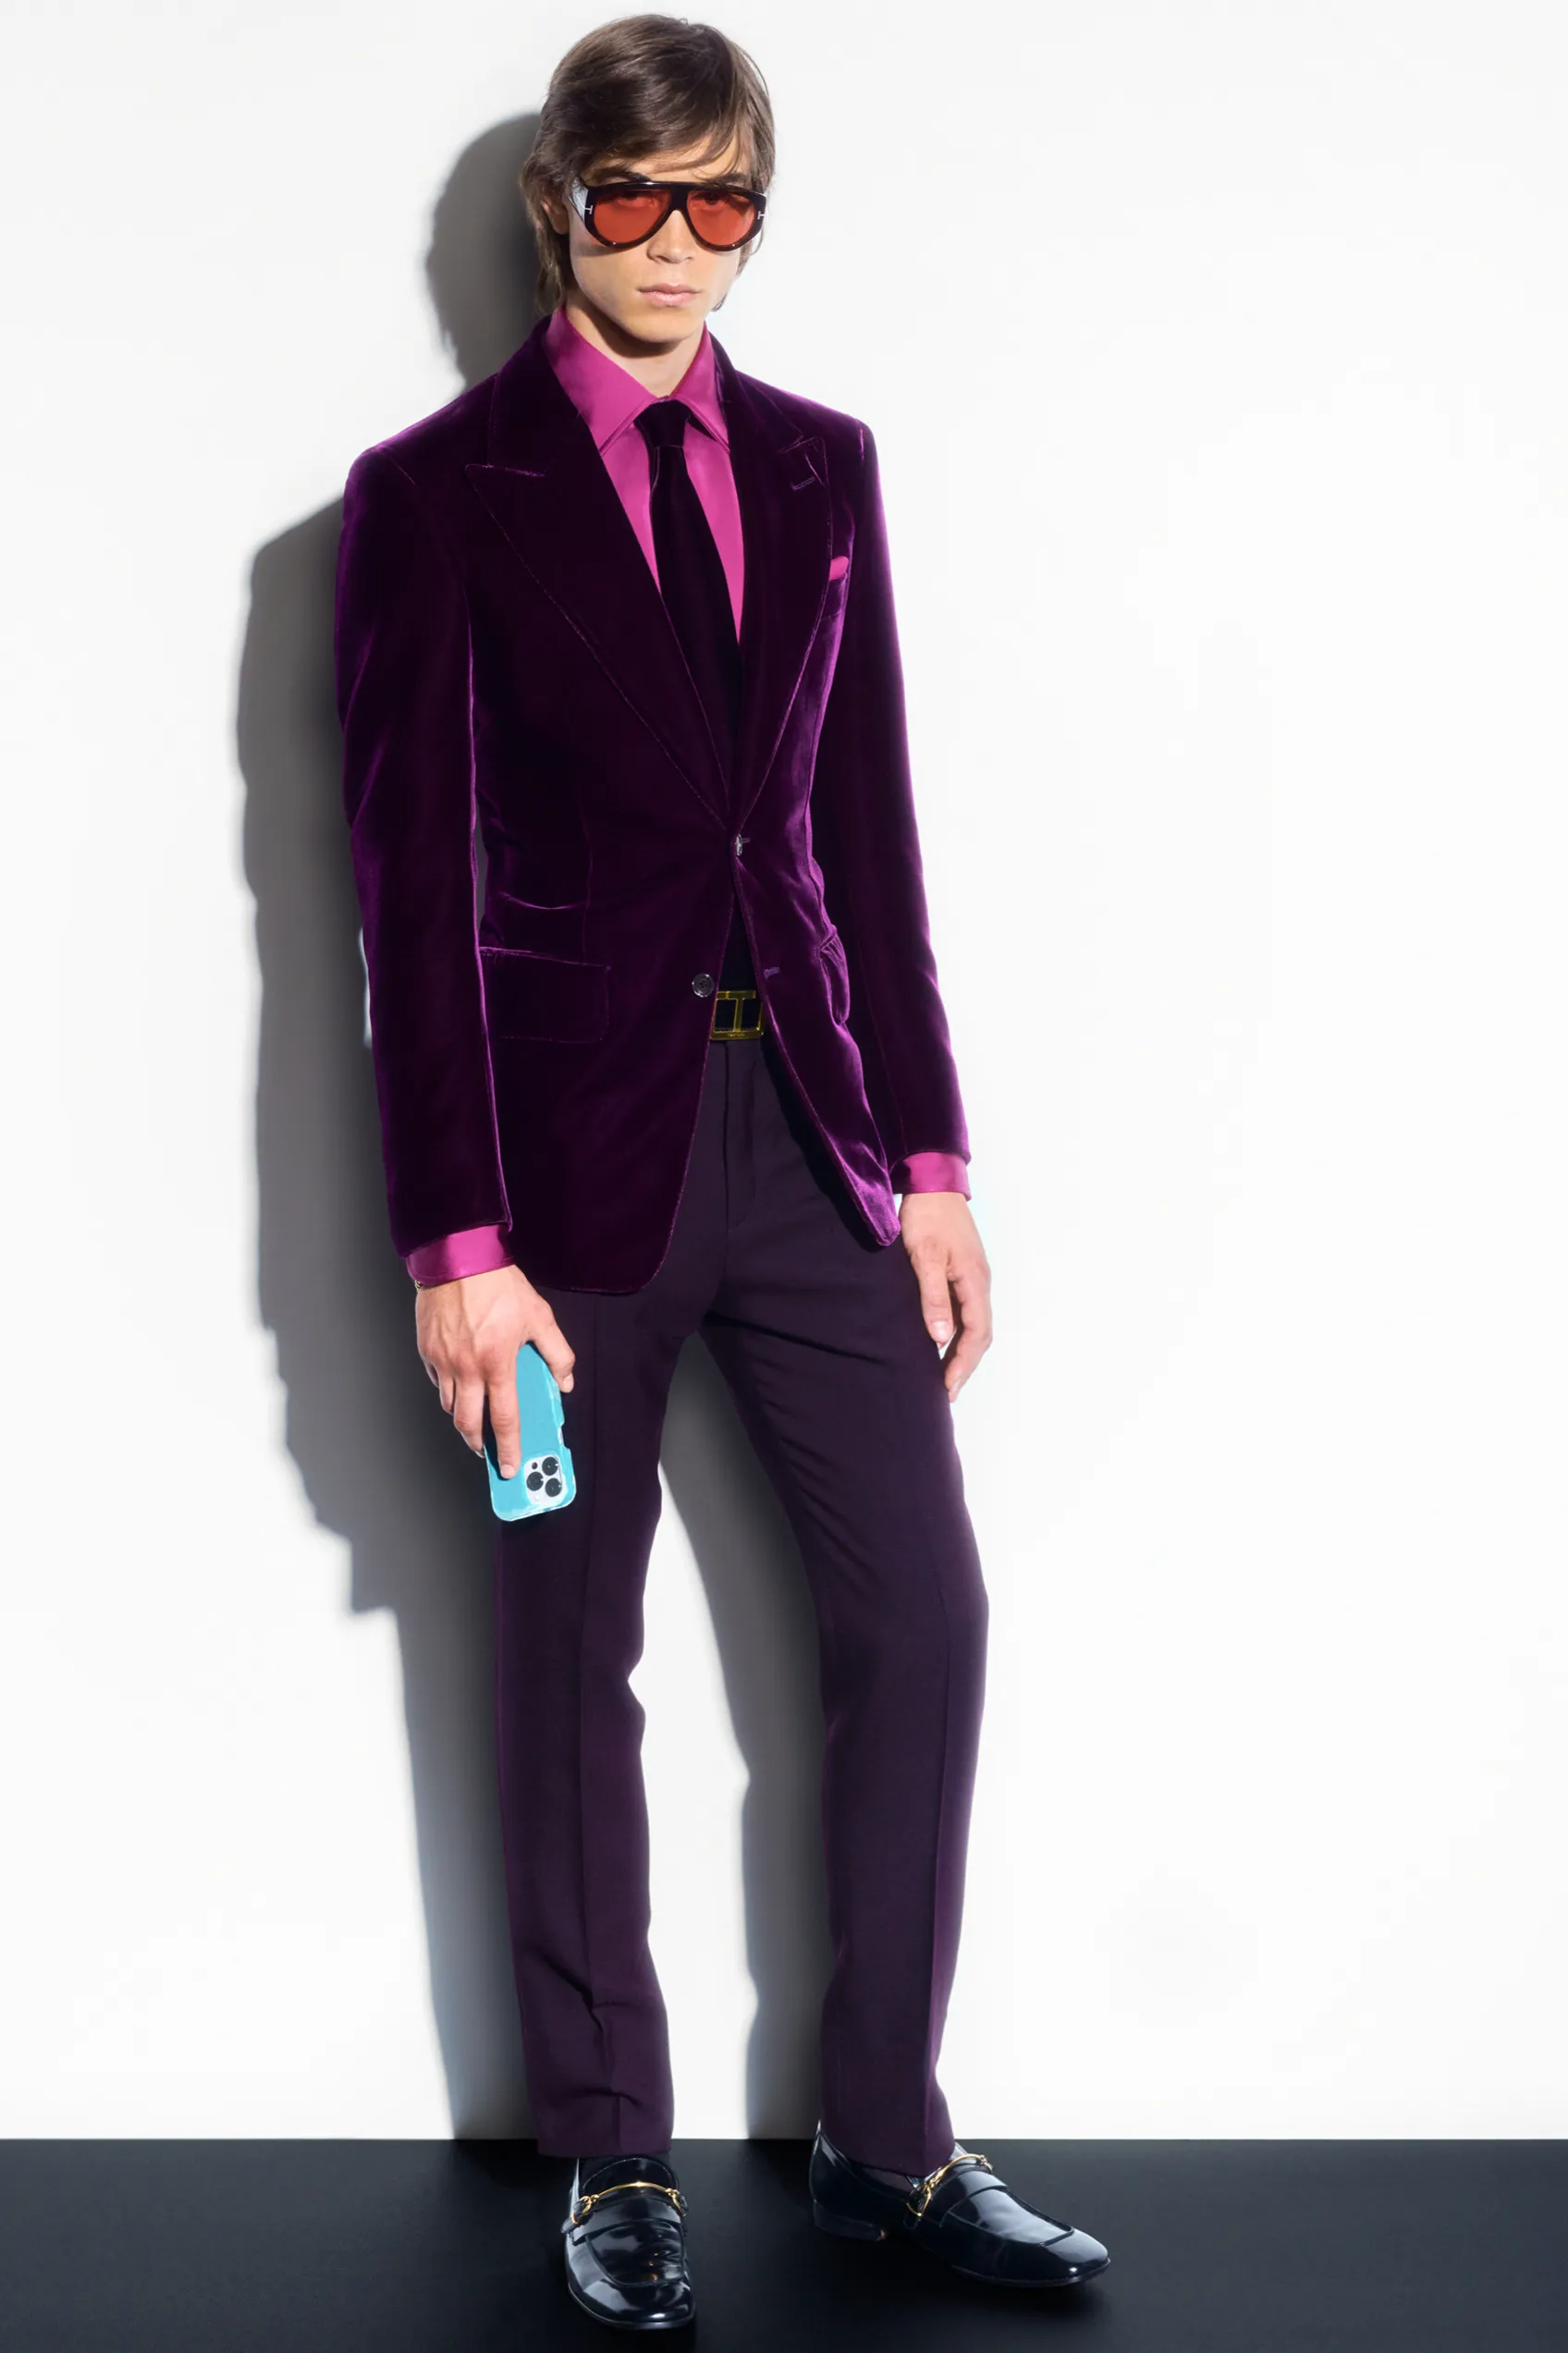 00002-tom-ford-fall-22-mens-nyc-credit-brand.png